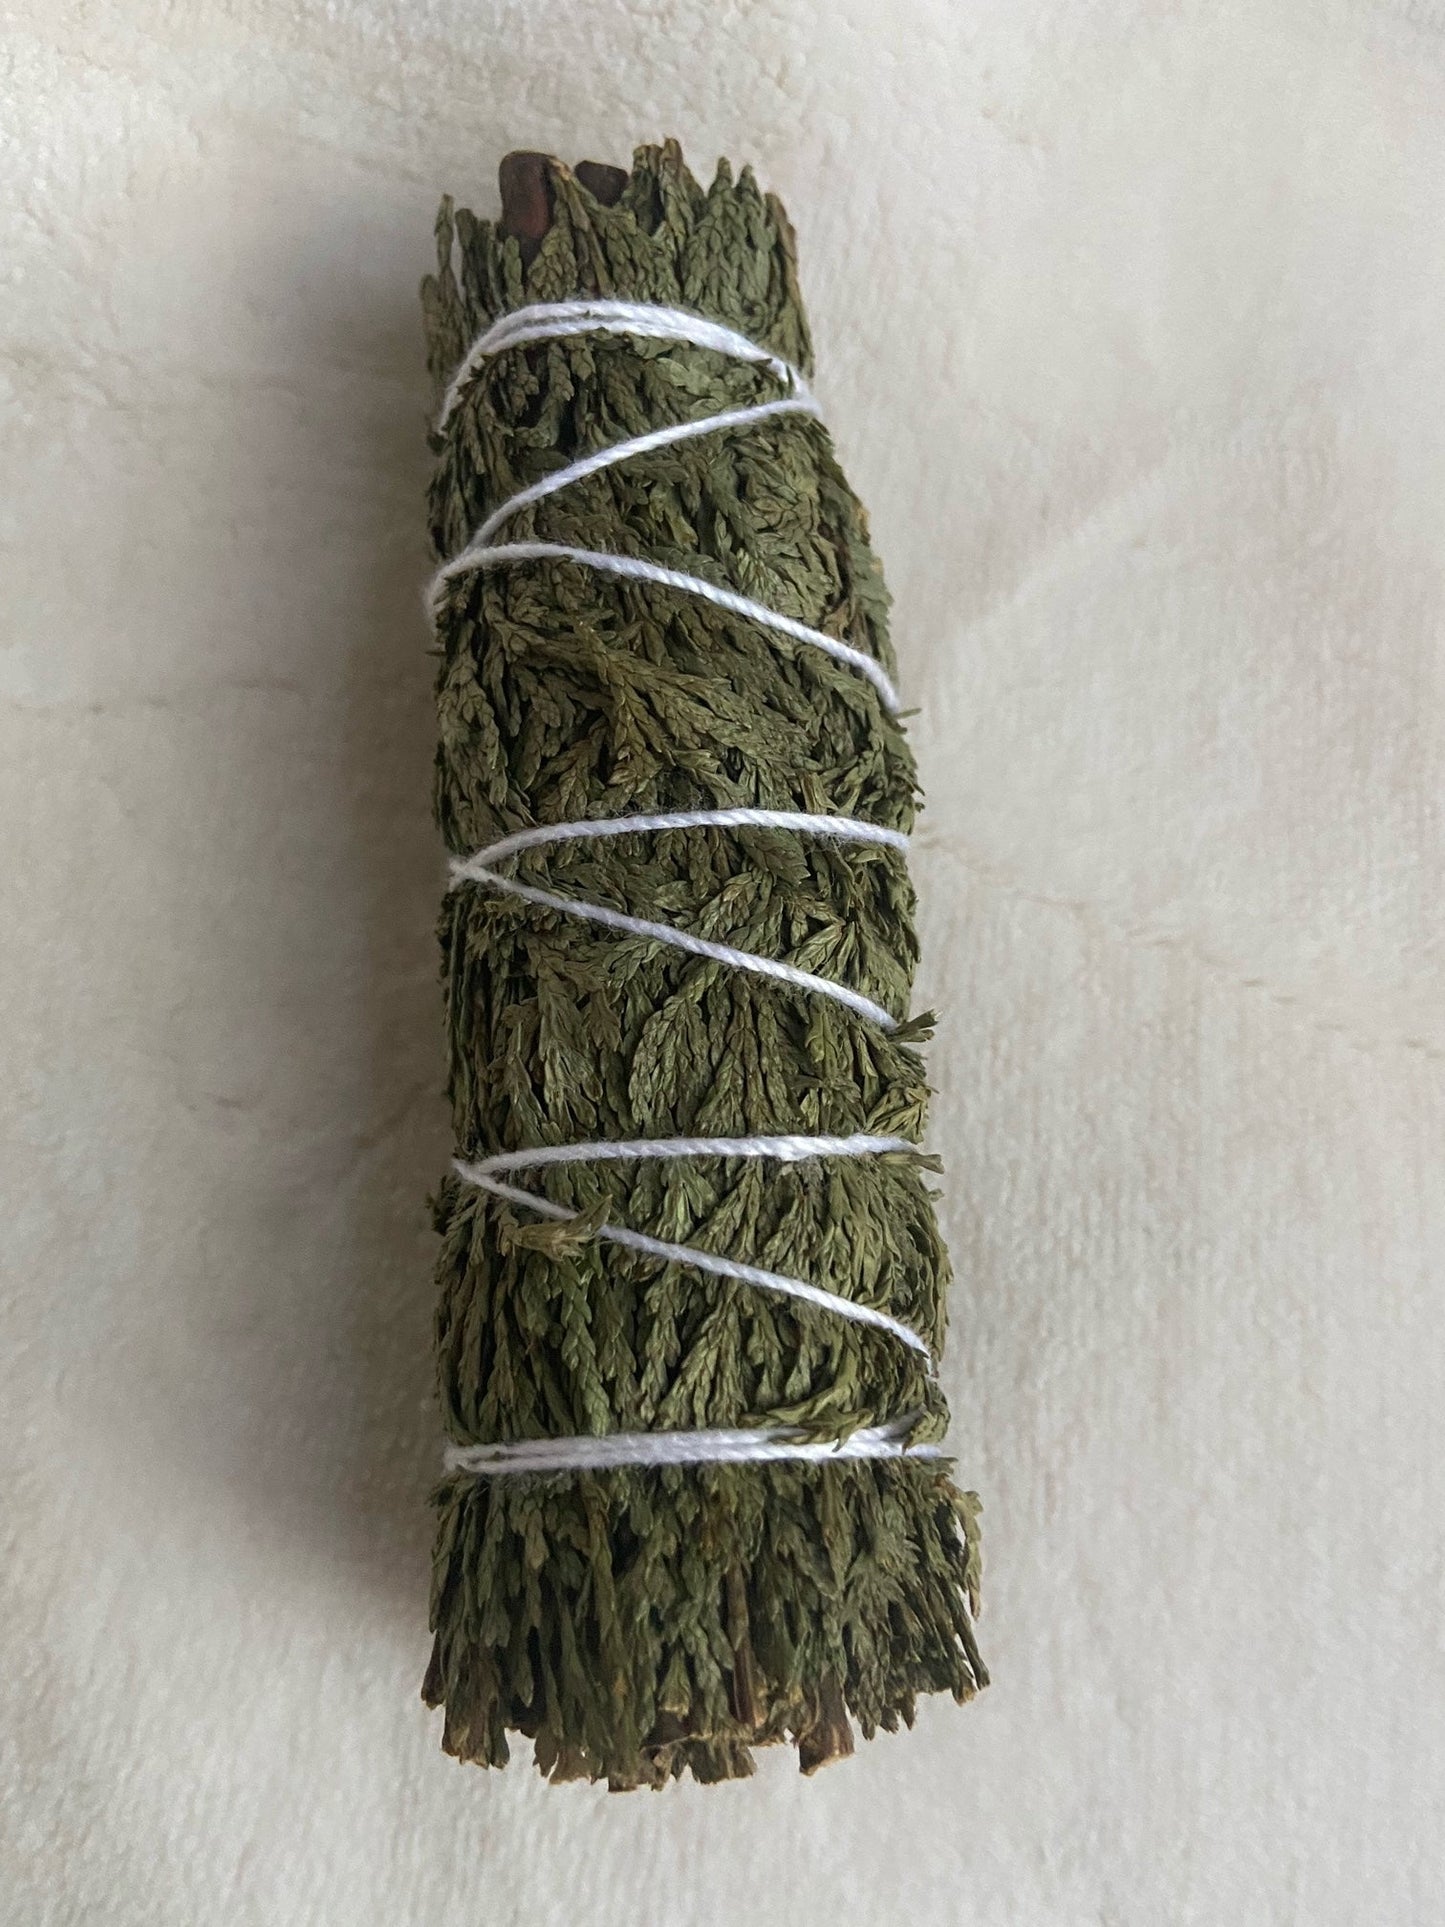  Cedar Sage Smudge Stick 3/pack - Sage available at Amazing Creations Products . Grab yours for $2.50 today!